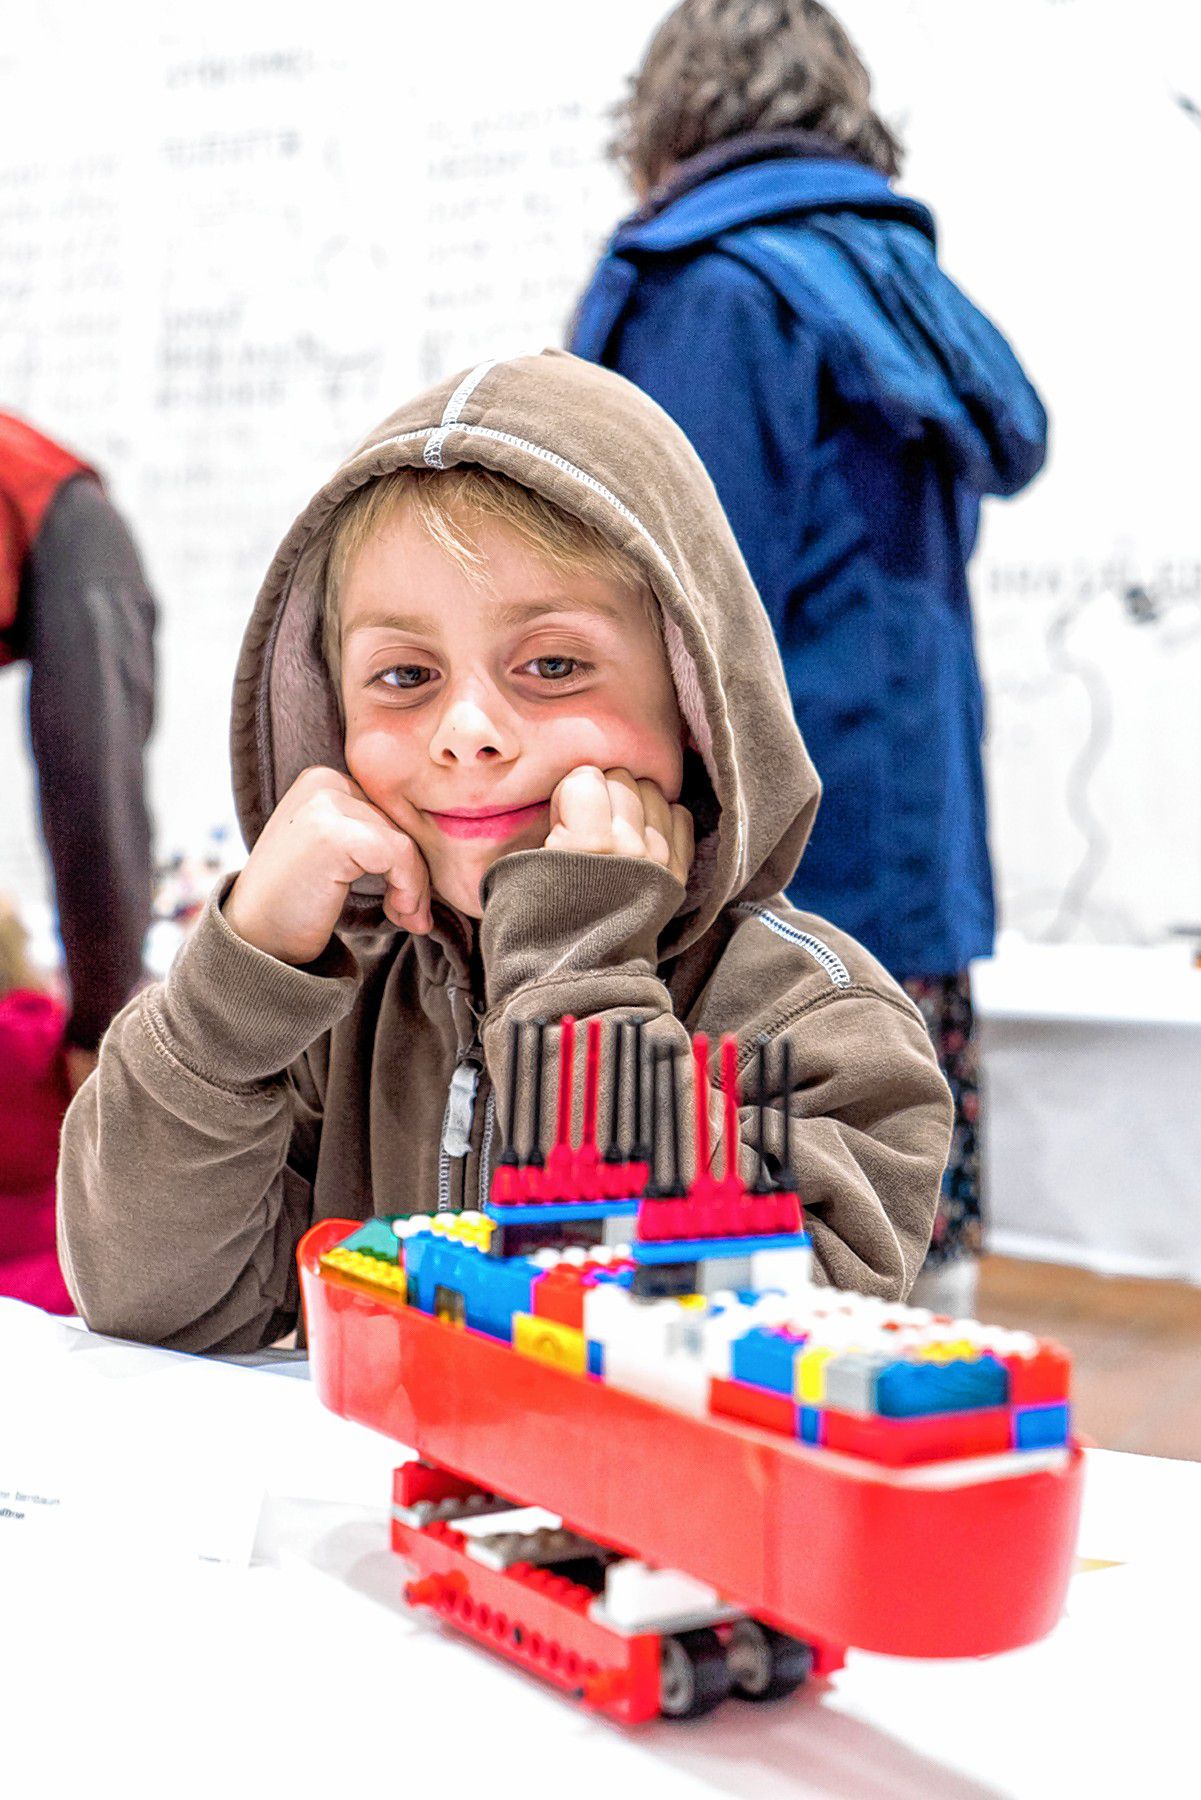 This Weekend: Brattleboro’s Annual LEGO Contest